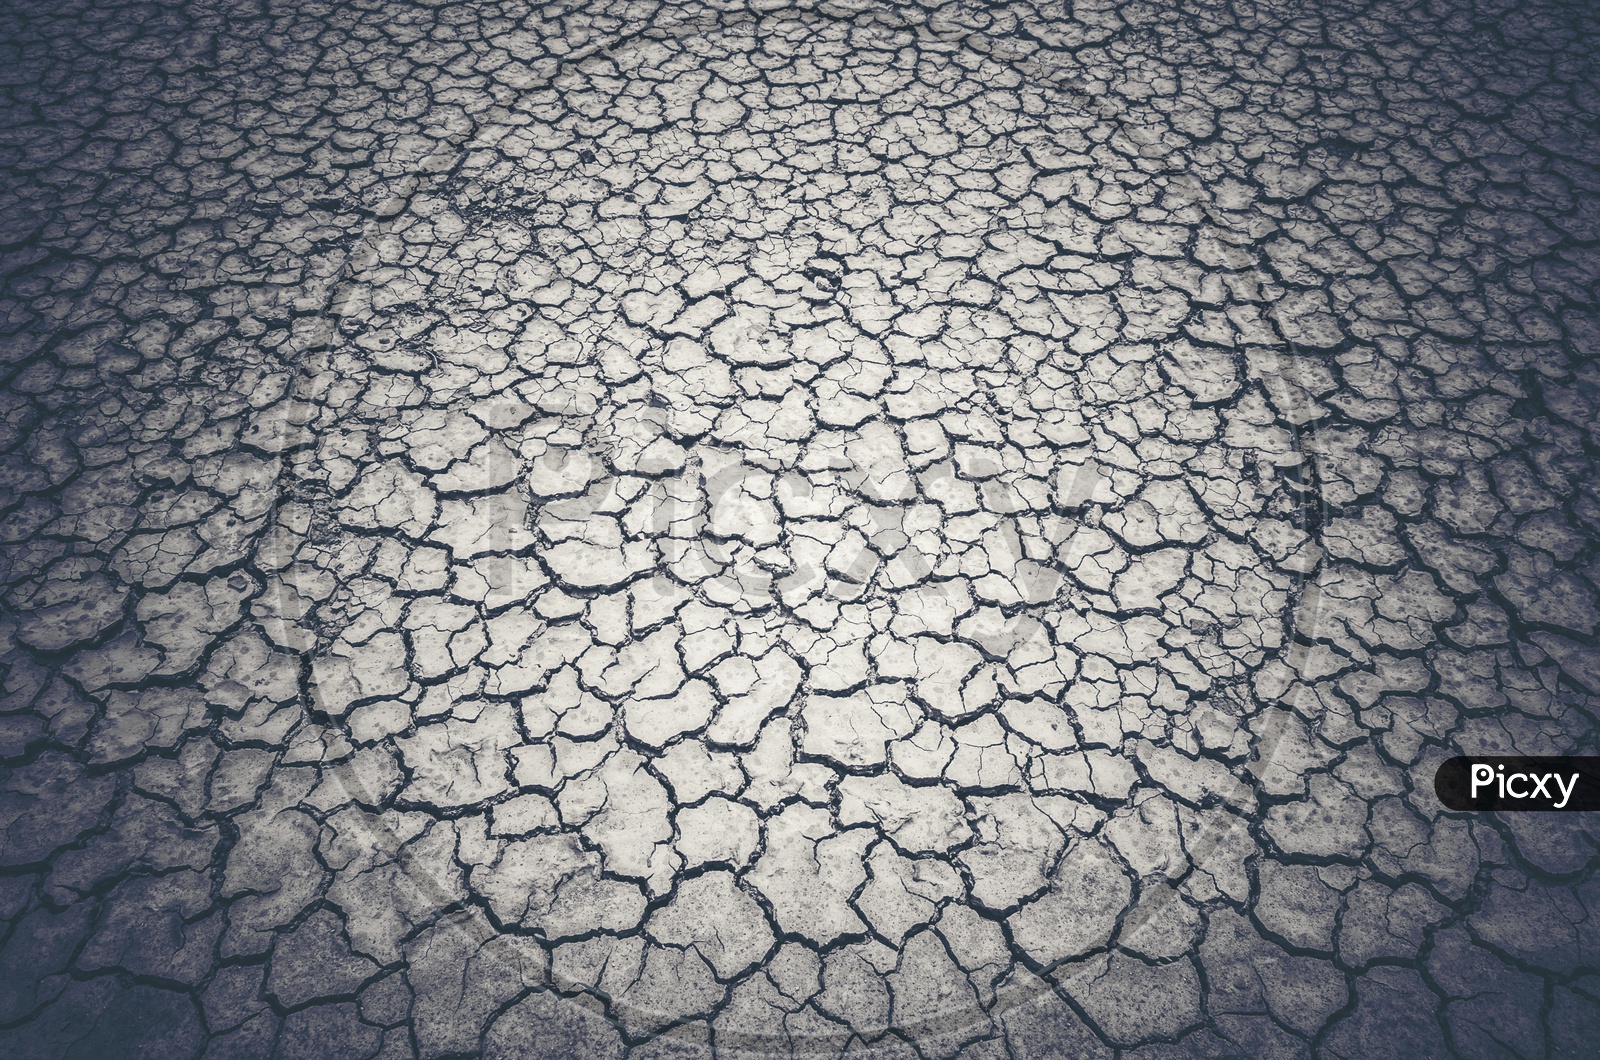 Drought Land With Dry Cracked Soil Texture With B&W Filter